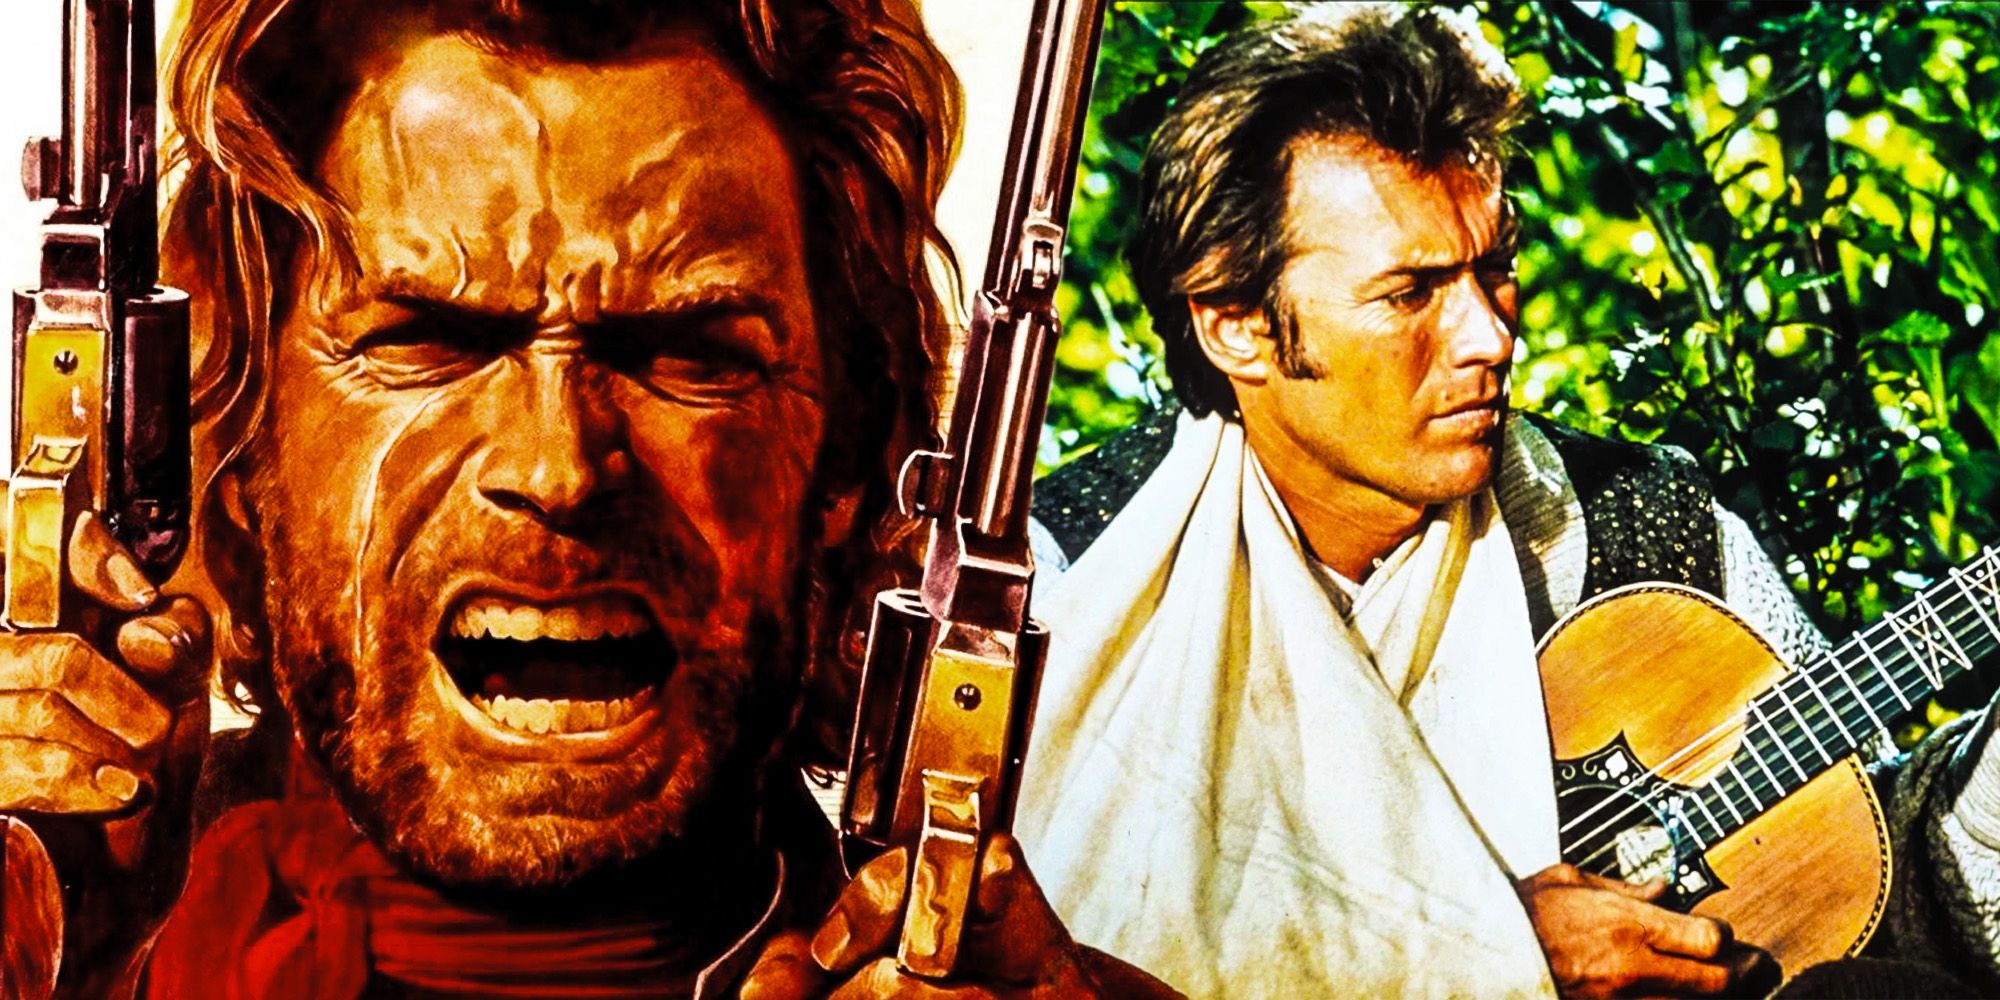 Why Clint Eastwood hates the one musical he made paint your wagon